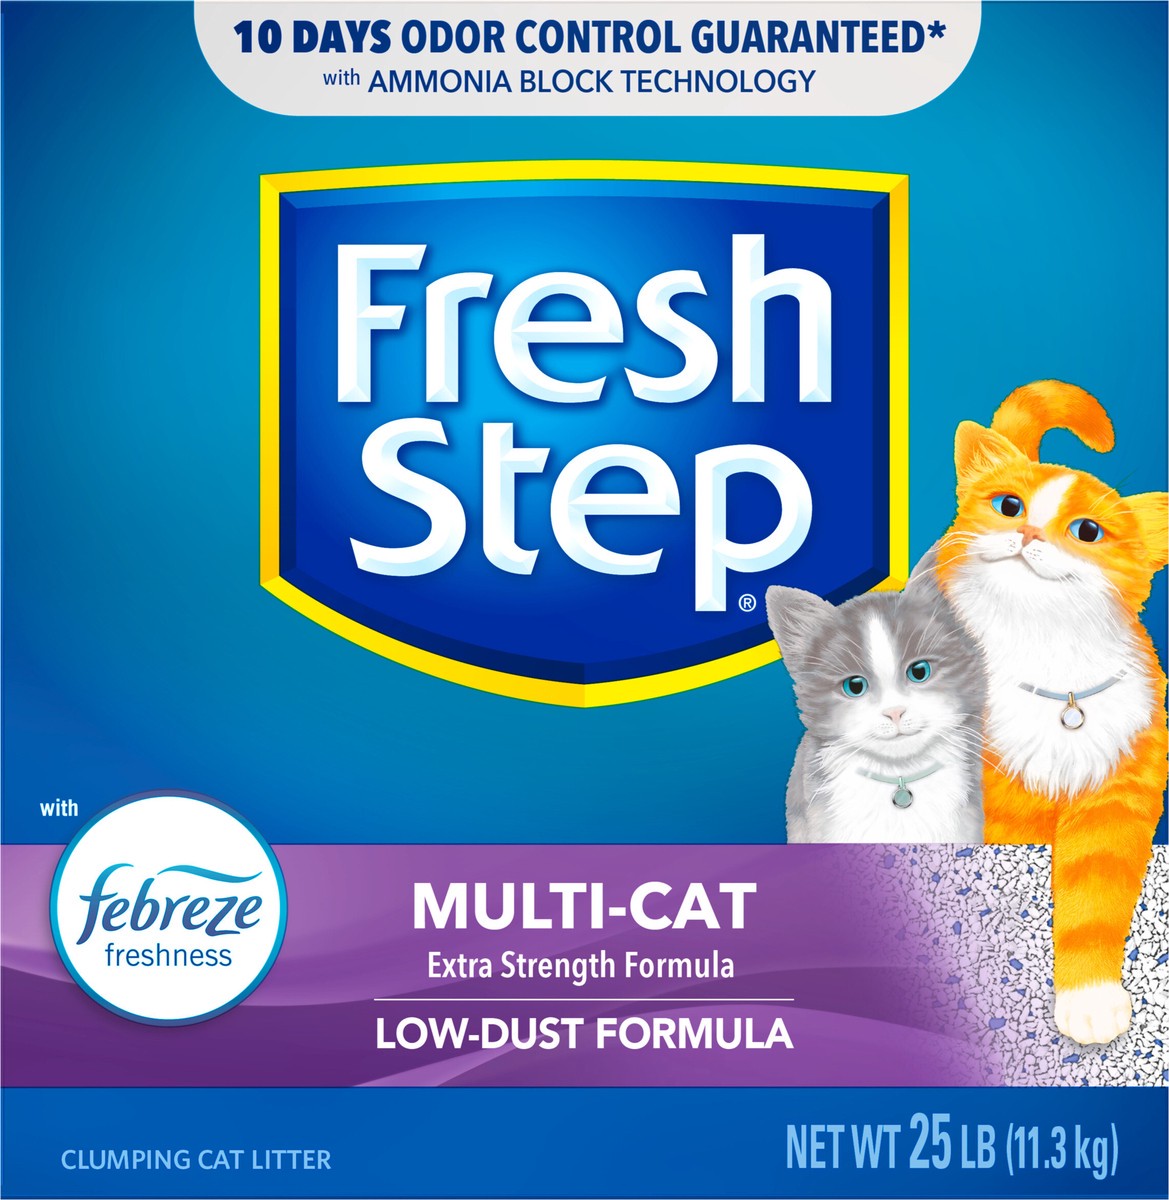 slide 5 of 9, Fresh Step Multi-Cat With Febreze Freshness Scented Clumping Cat Litter, 25 lb